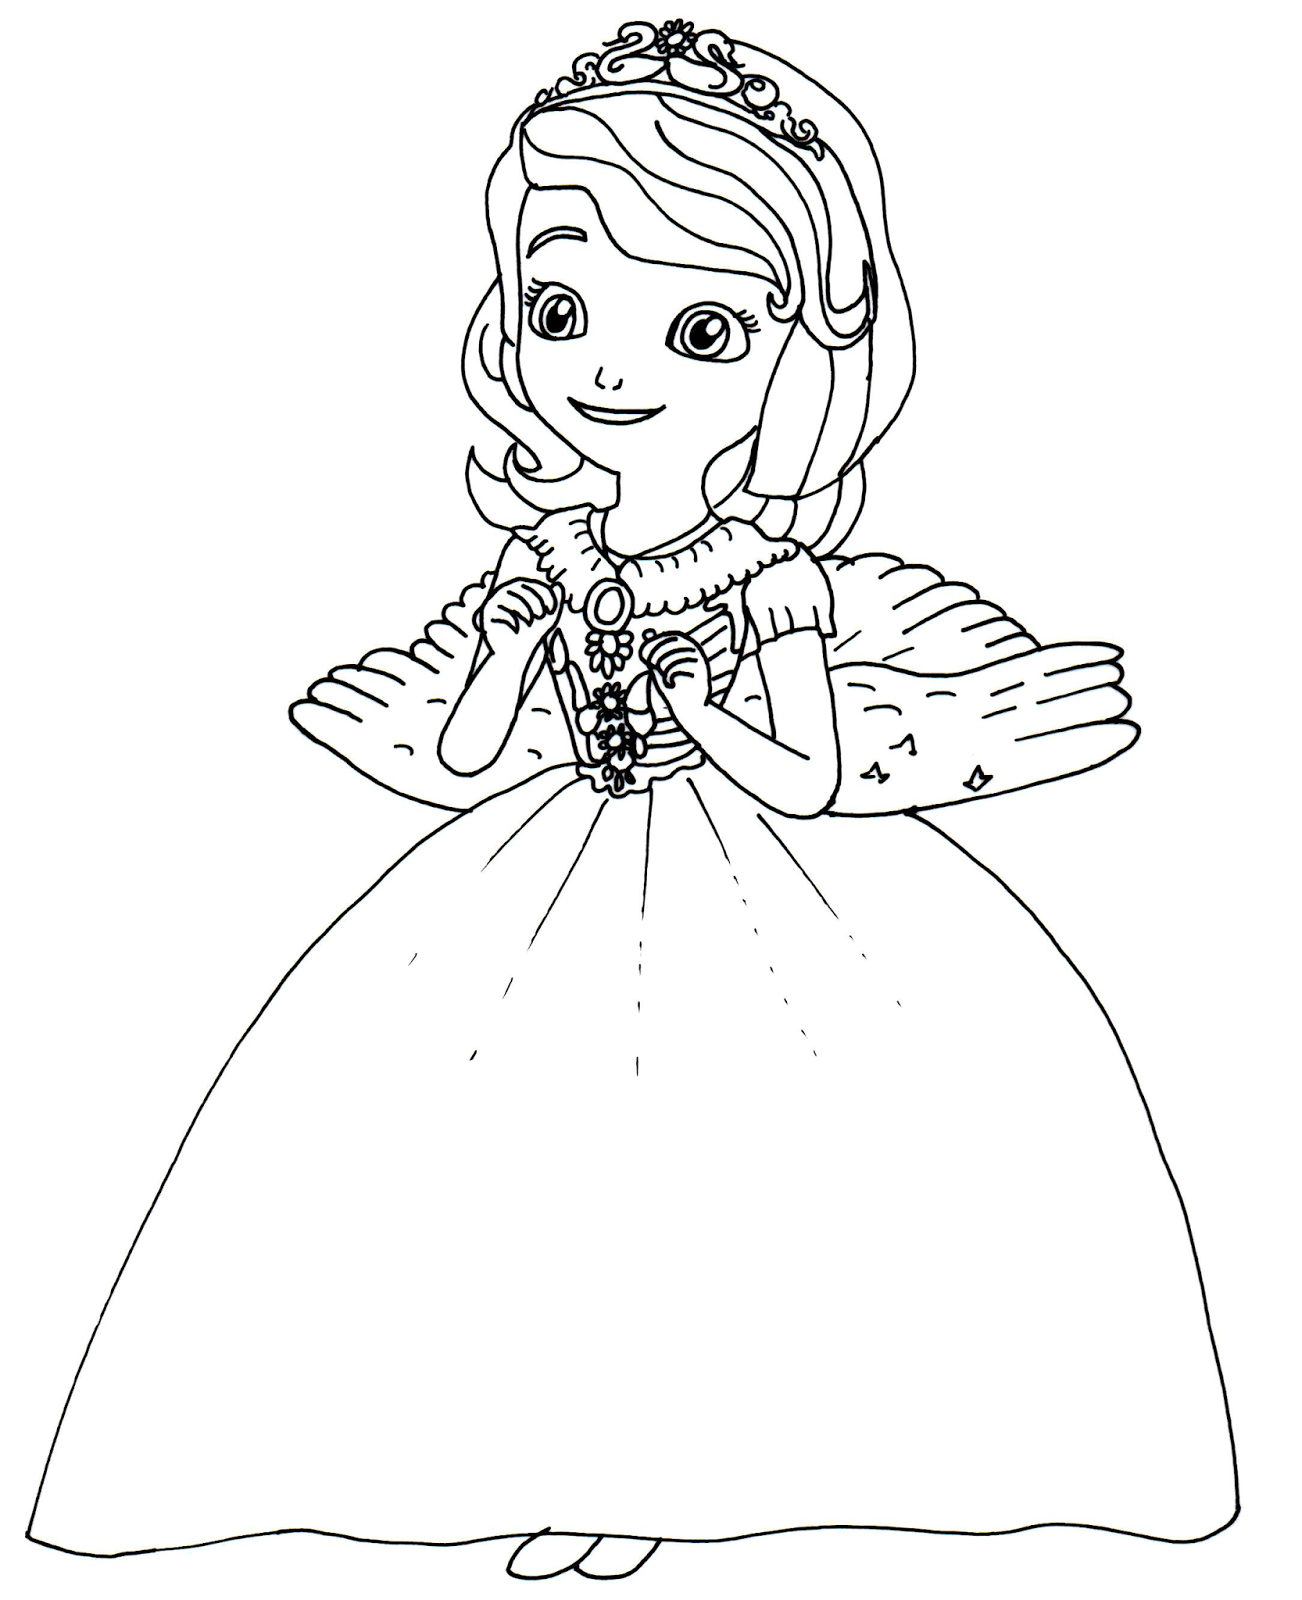 Sofia The First Coloring Pages Image For Kid.